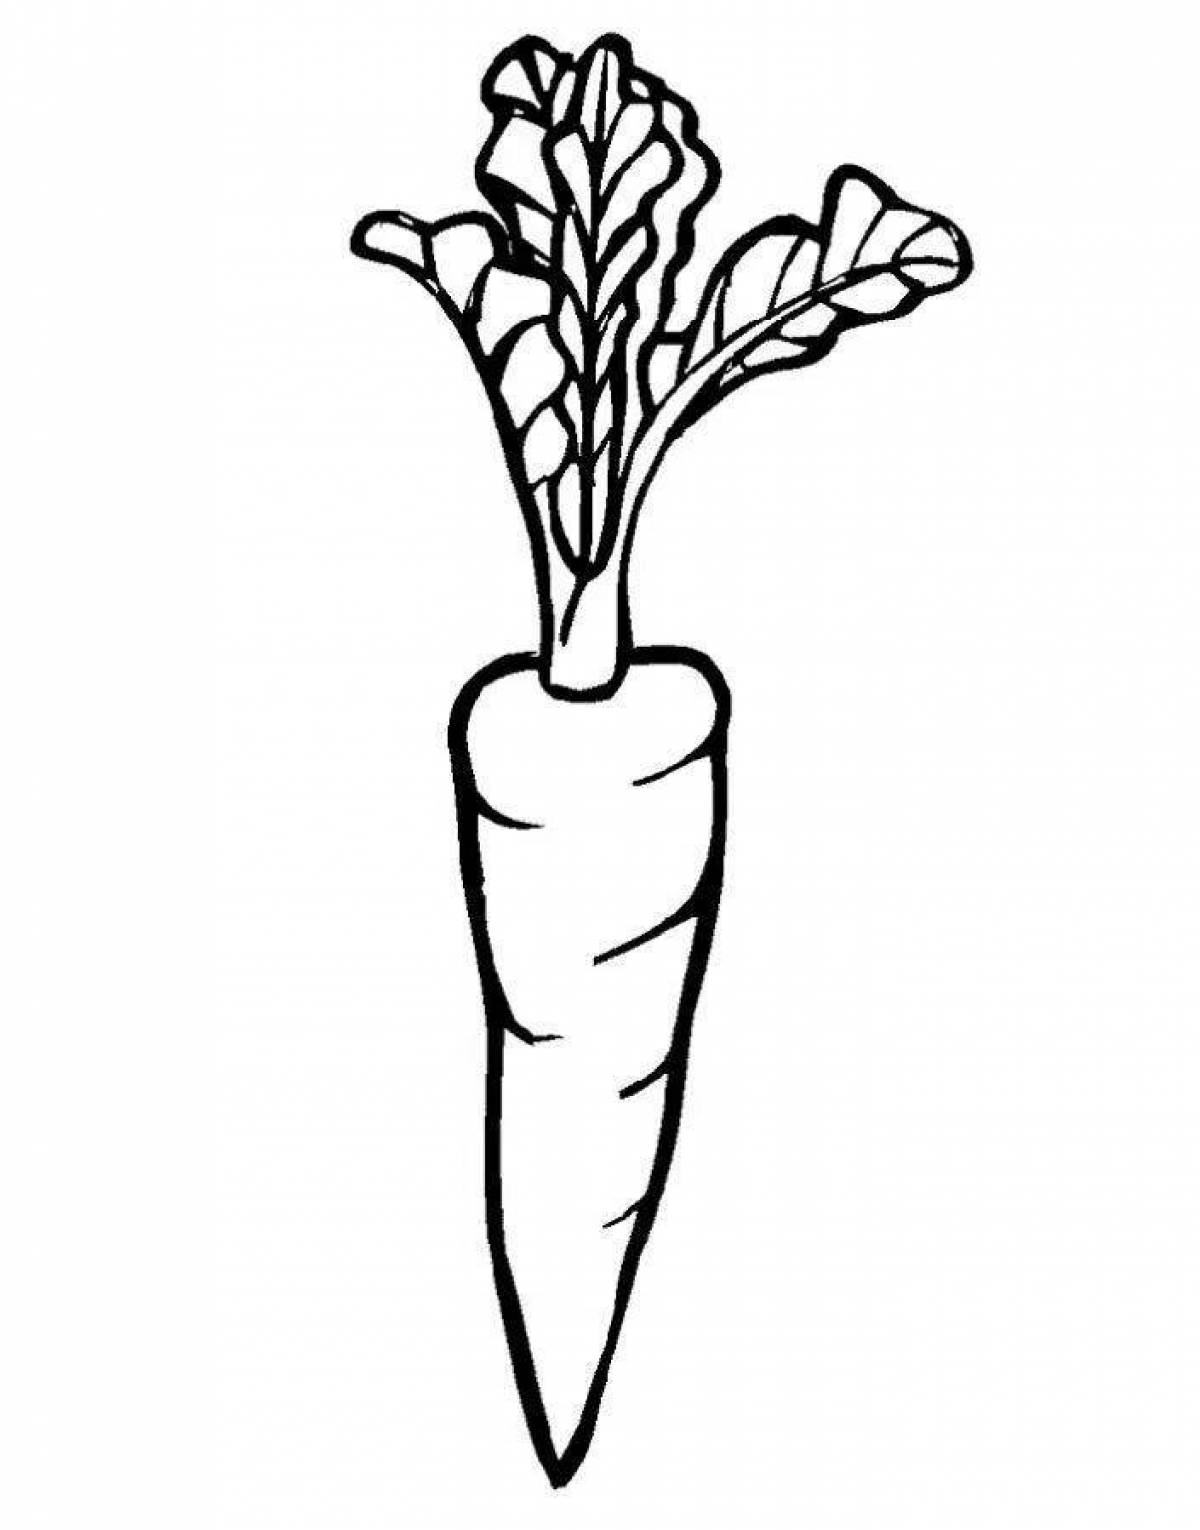 Living carrot drawing